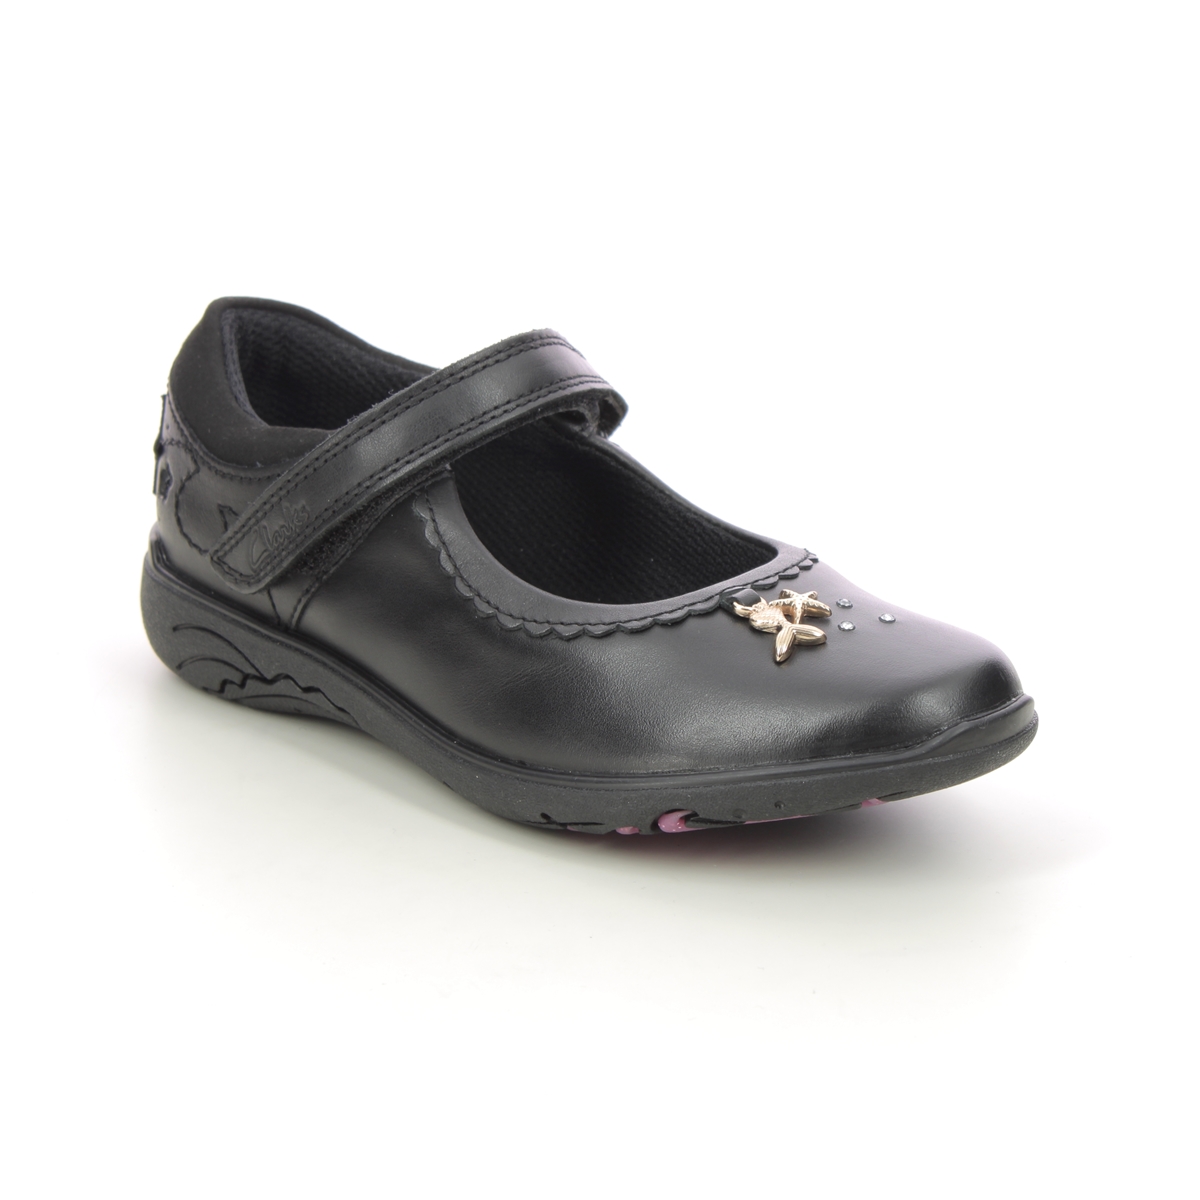 Clarks Relda Sea K Mary Jane Black Leather Kids Girls School Shoes 722406F In Size 1 In Plain Black Leather F Width Fitting Regular Fit For School For